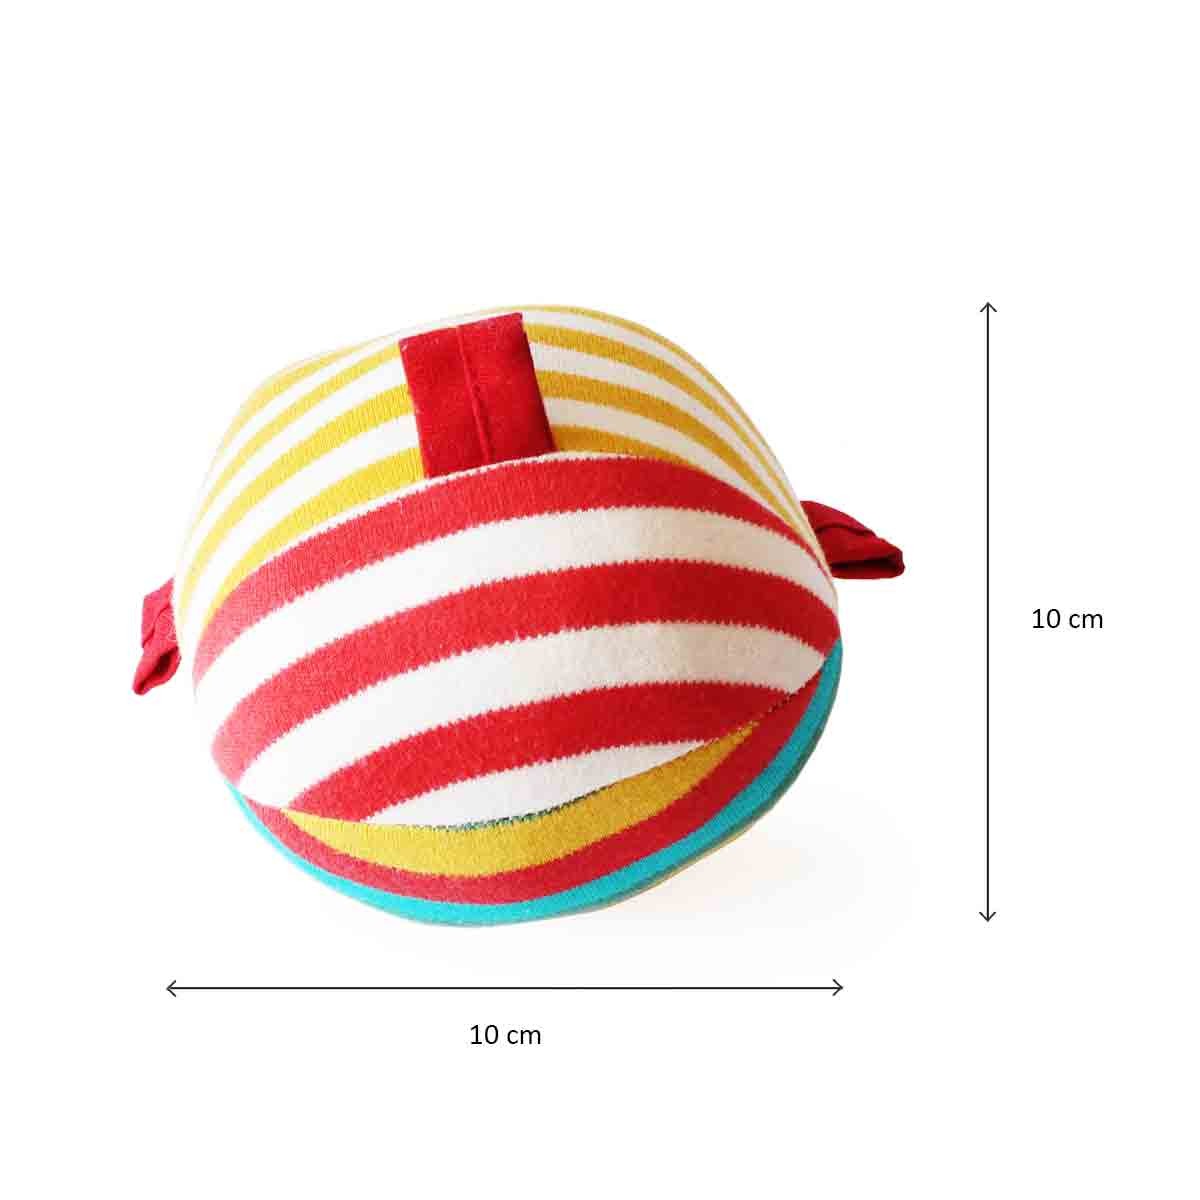 Shumee Cotton Ele And Ball Rattle Organic Plush Toy for Kids, 0M+